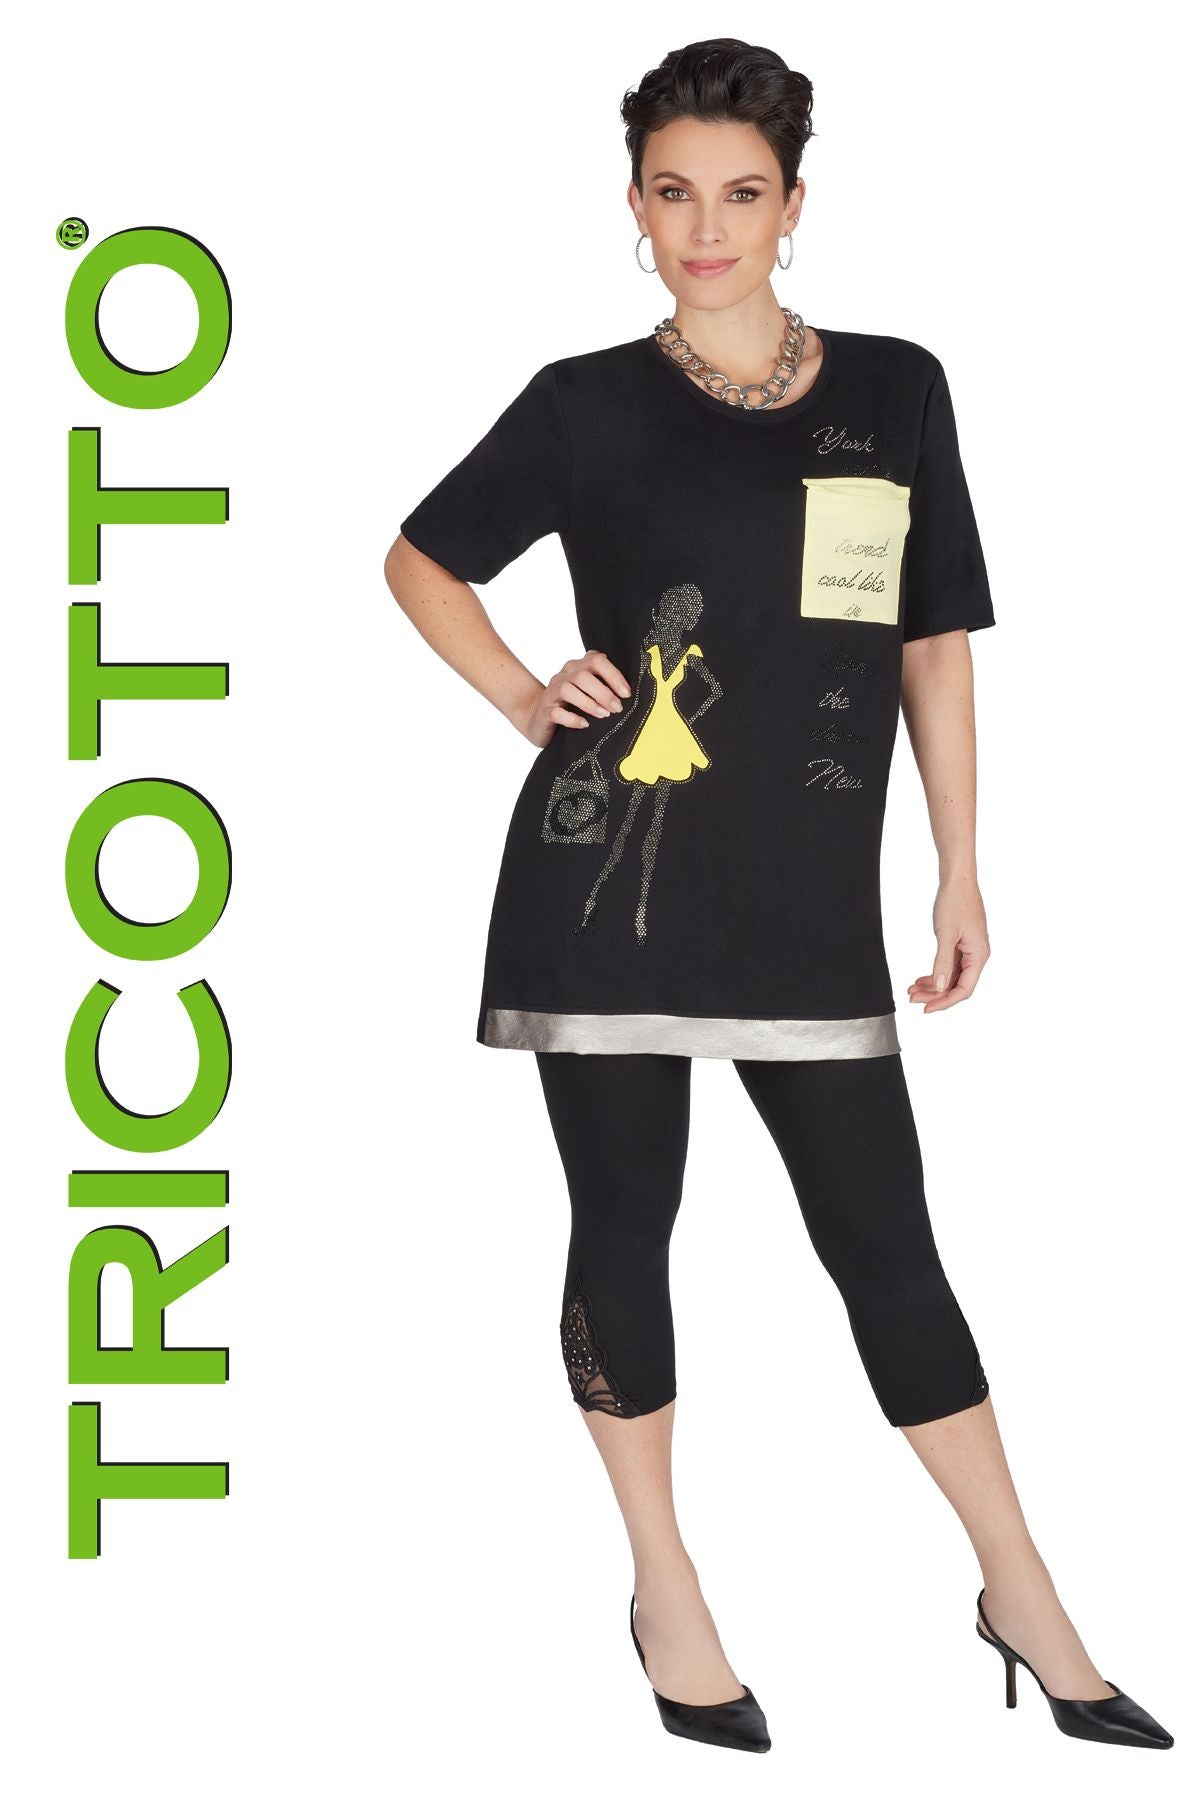 Tricotto Tunics-Buy Tricotto Tunics Online-Tricotto Clothing Montreal-Women's Tunics Online Canada